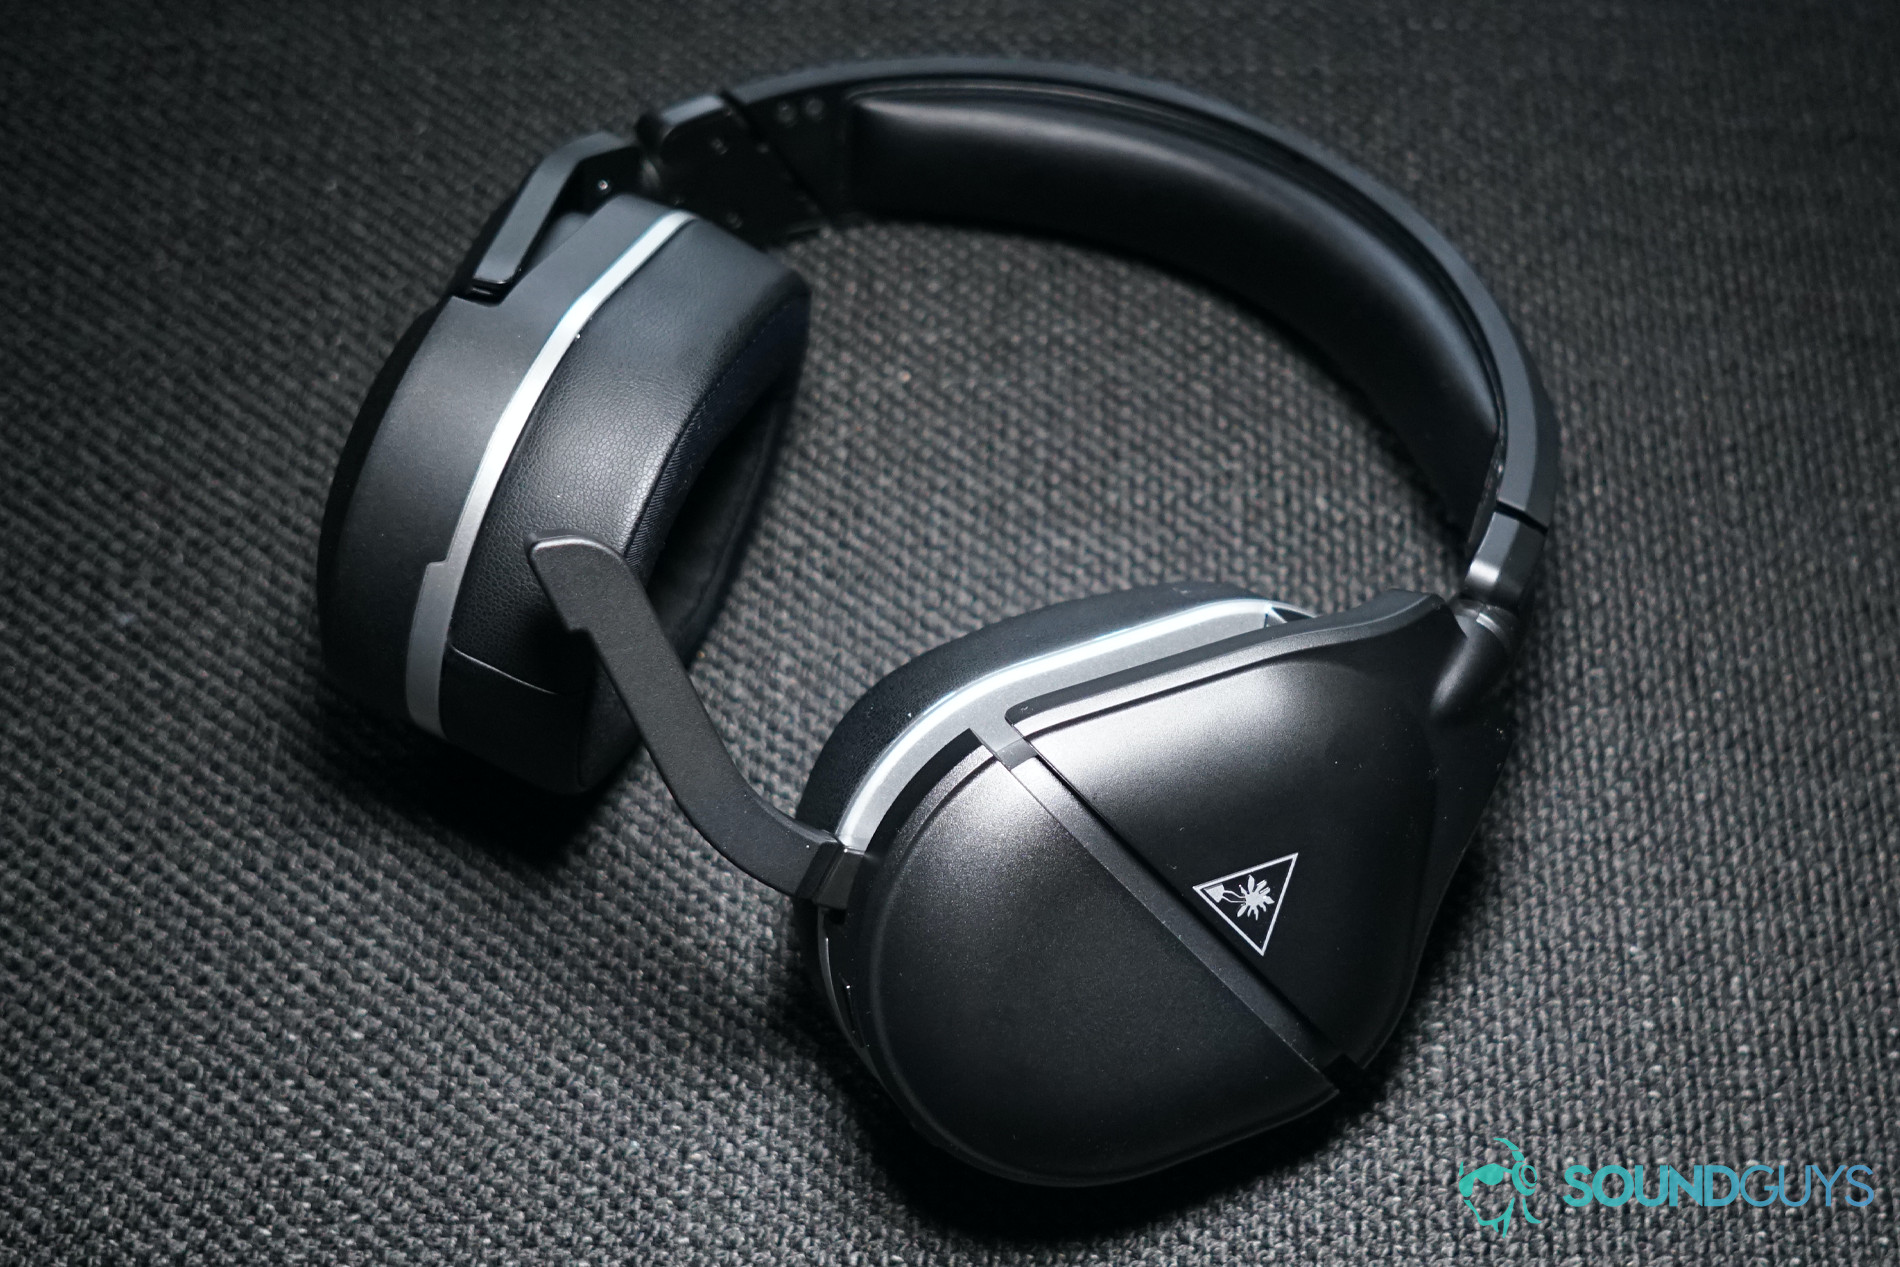 The Turtle Beach Stealth 700 Gen 2 sits on a fabric surface with its attached mic unfolded.